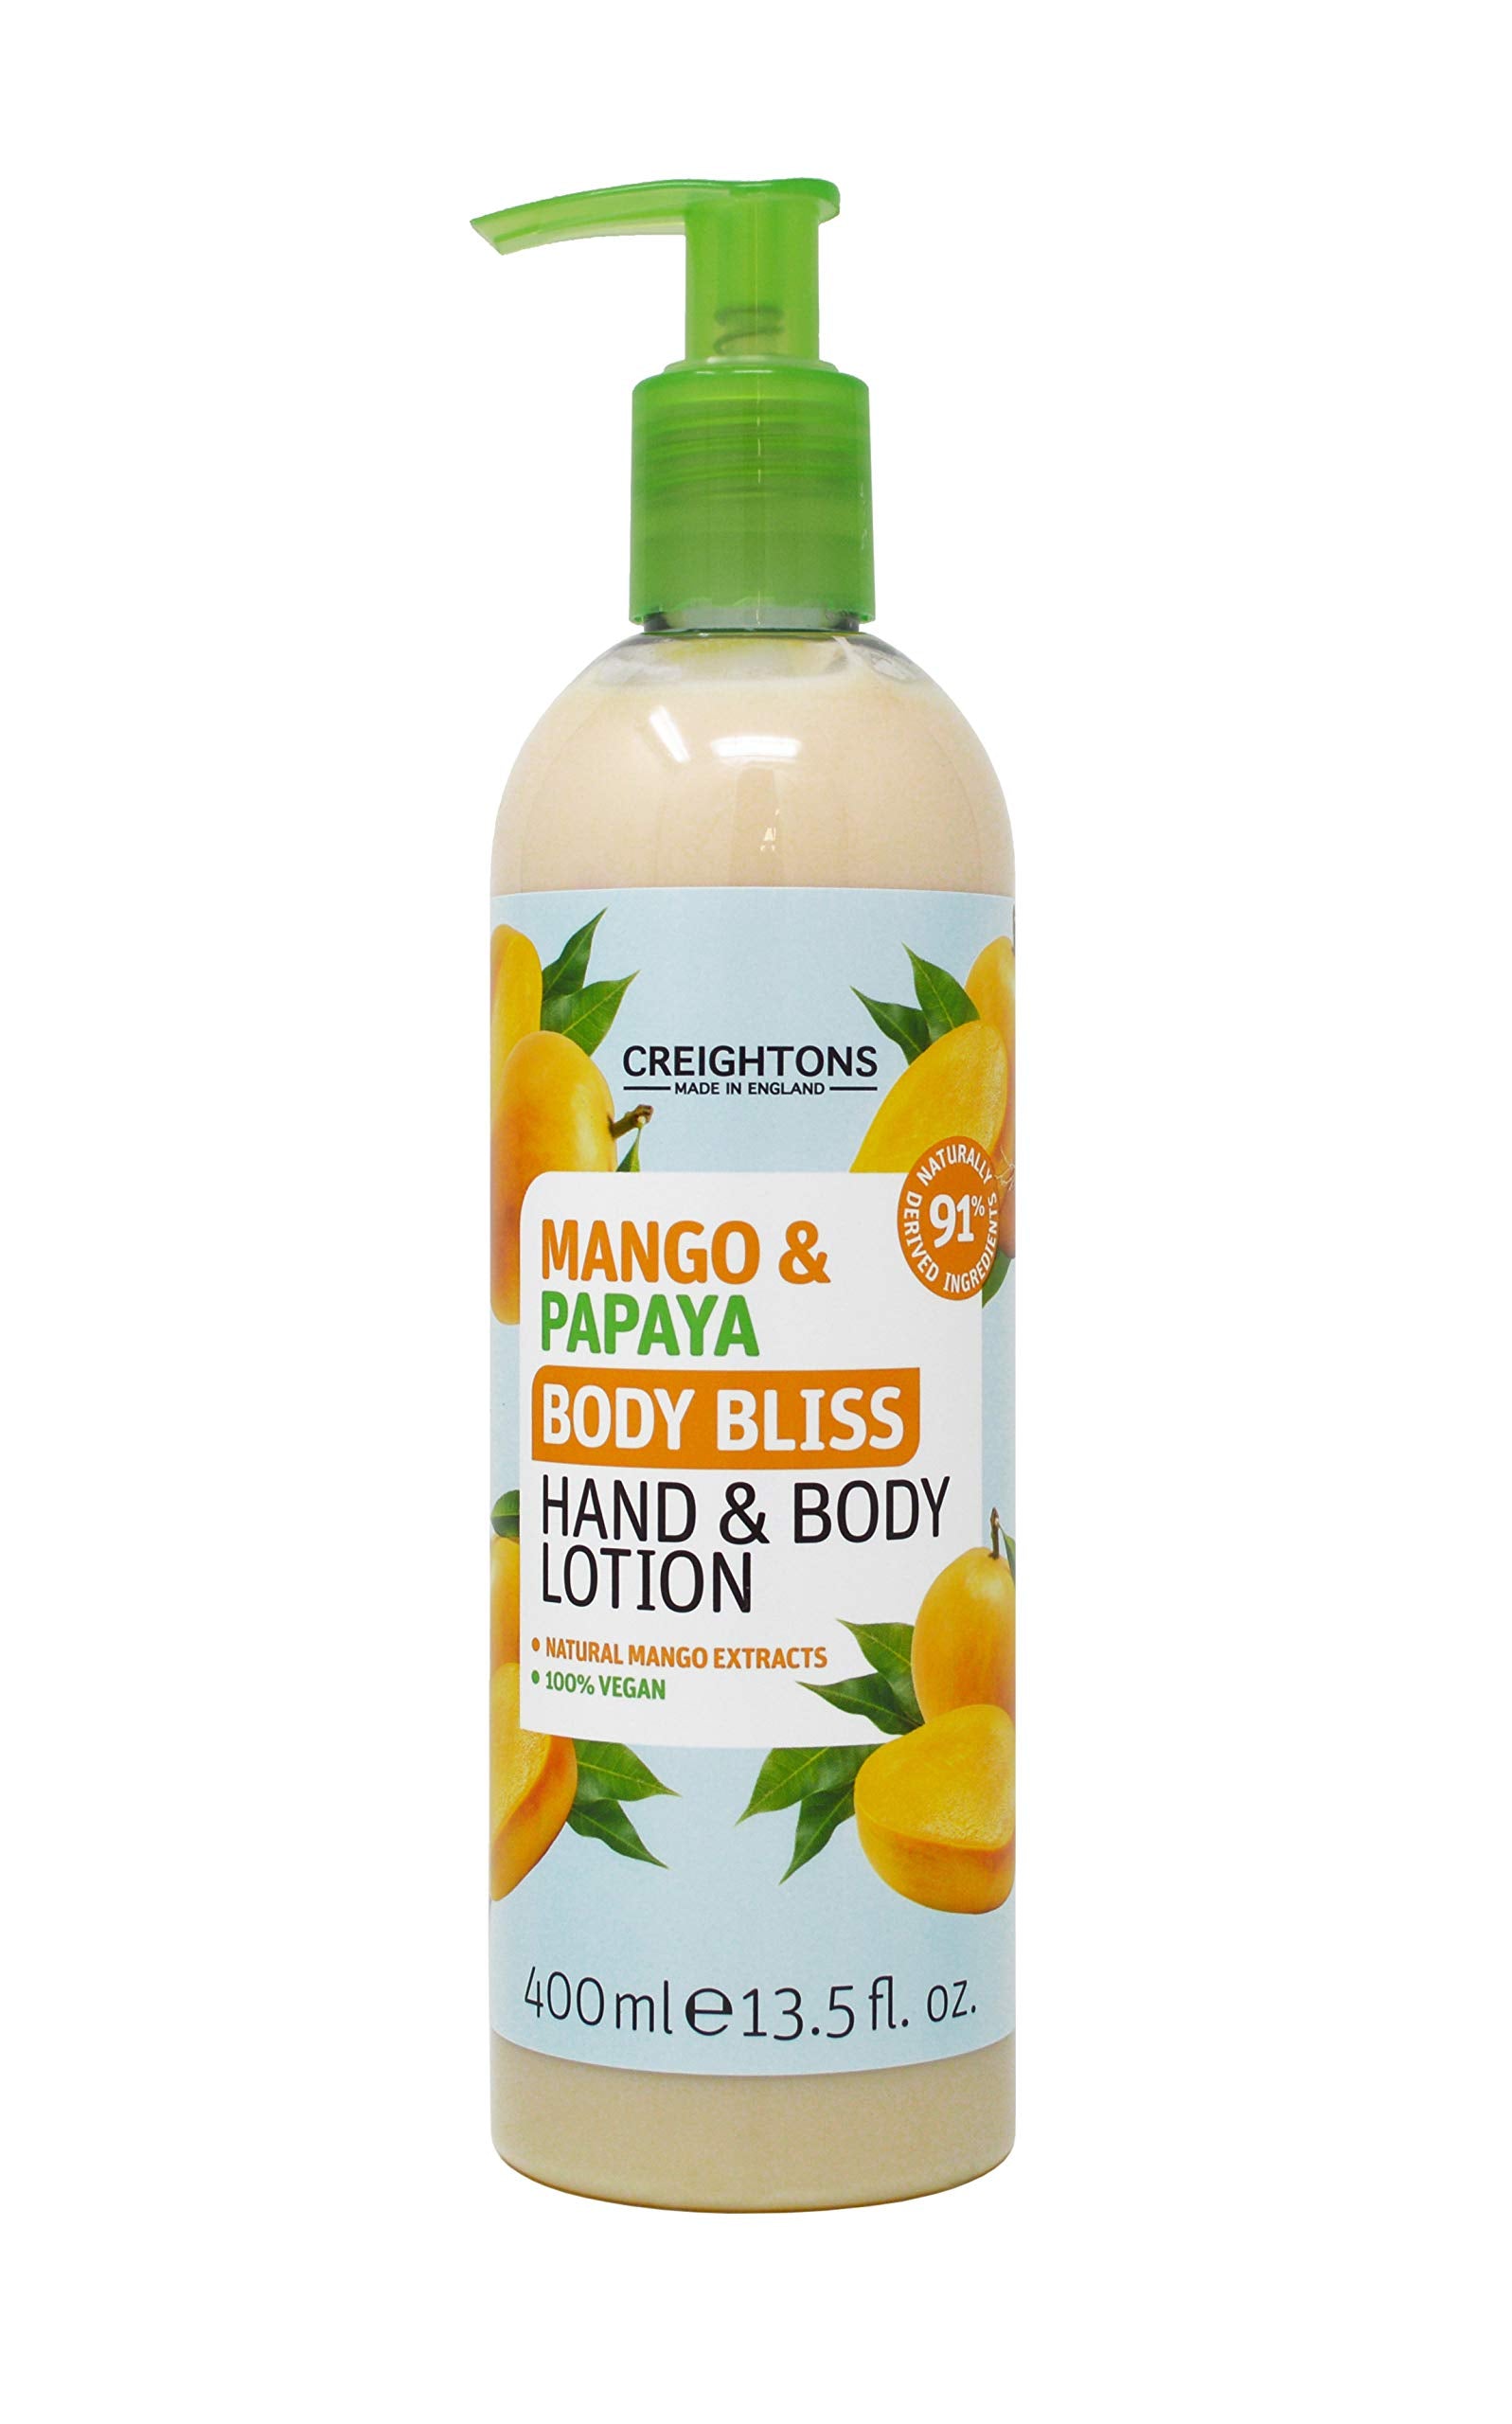 Creightons Body Bliss Mango and Papaya Hand and Body Lotion (400ml) - Made with 91% naturally derived ingredients, Cruelty free, Vegan friendly & Paraben free